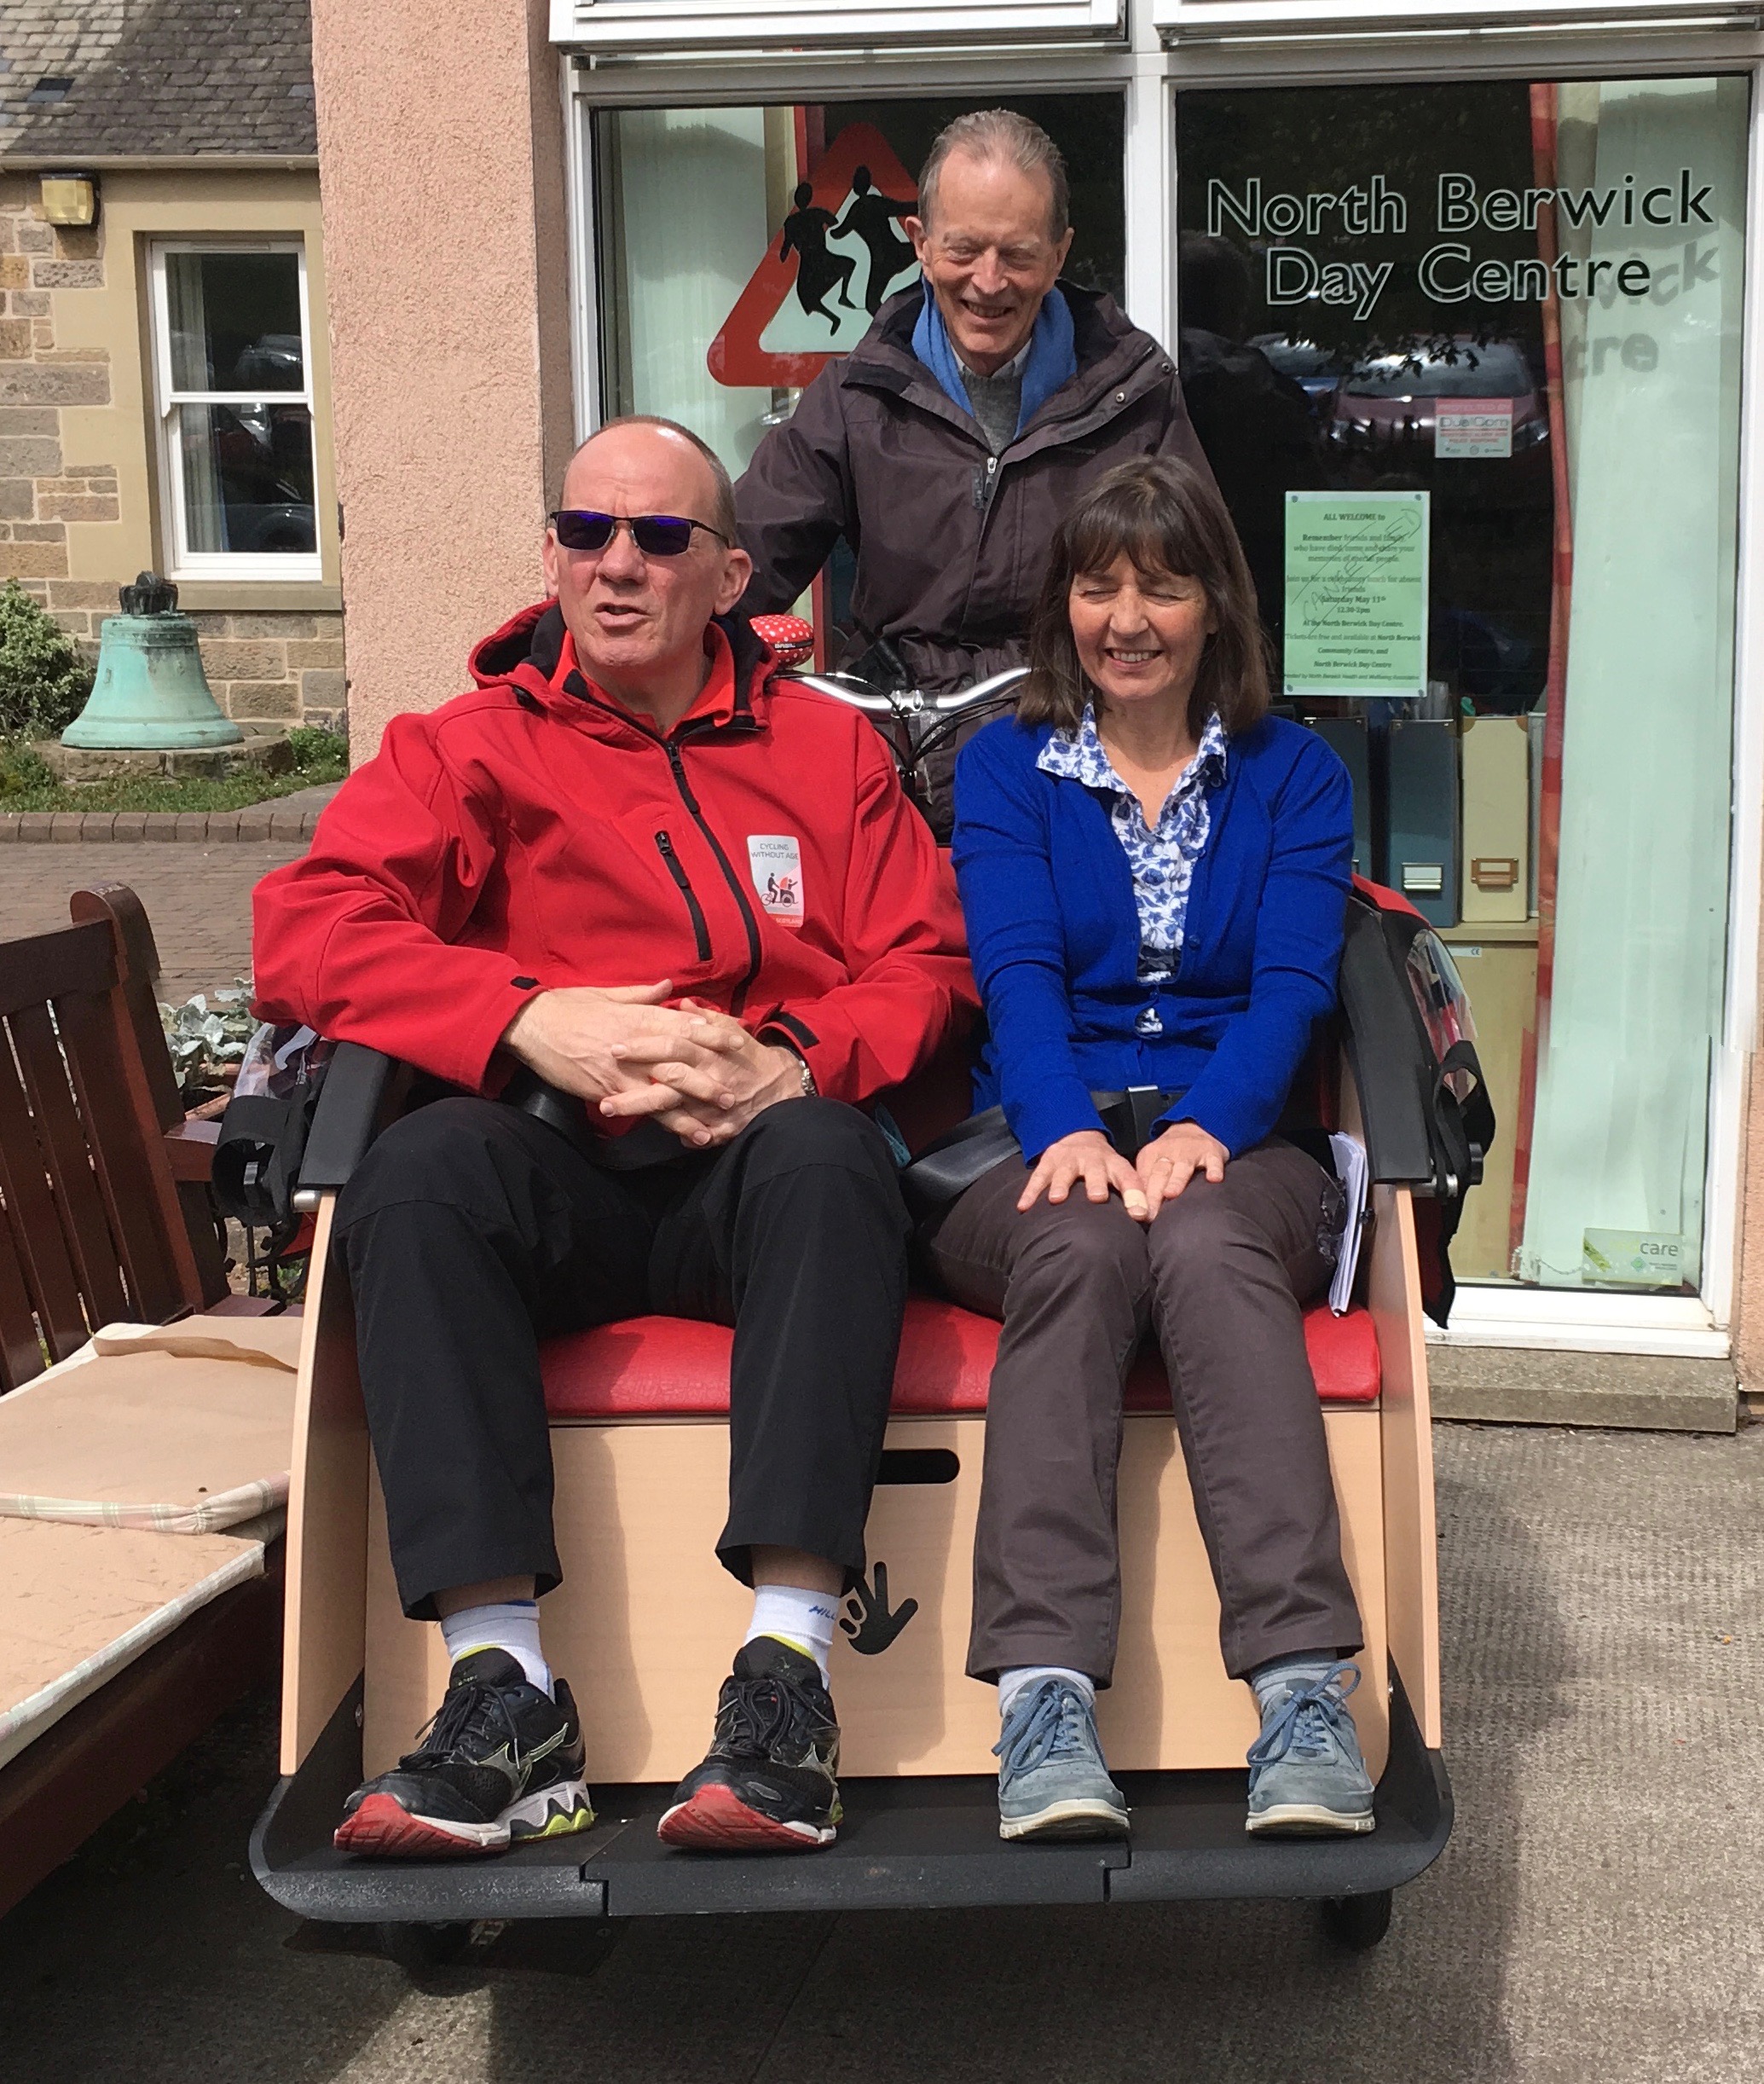 New tricycle for Cycling Without Age in North Berwick